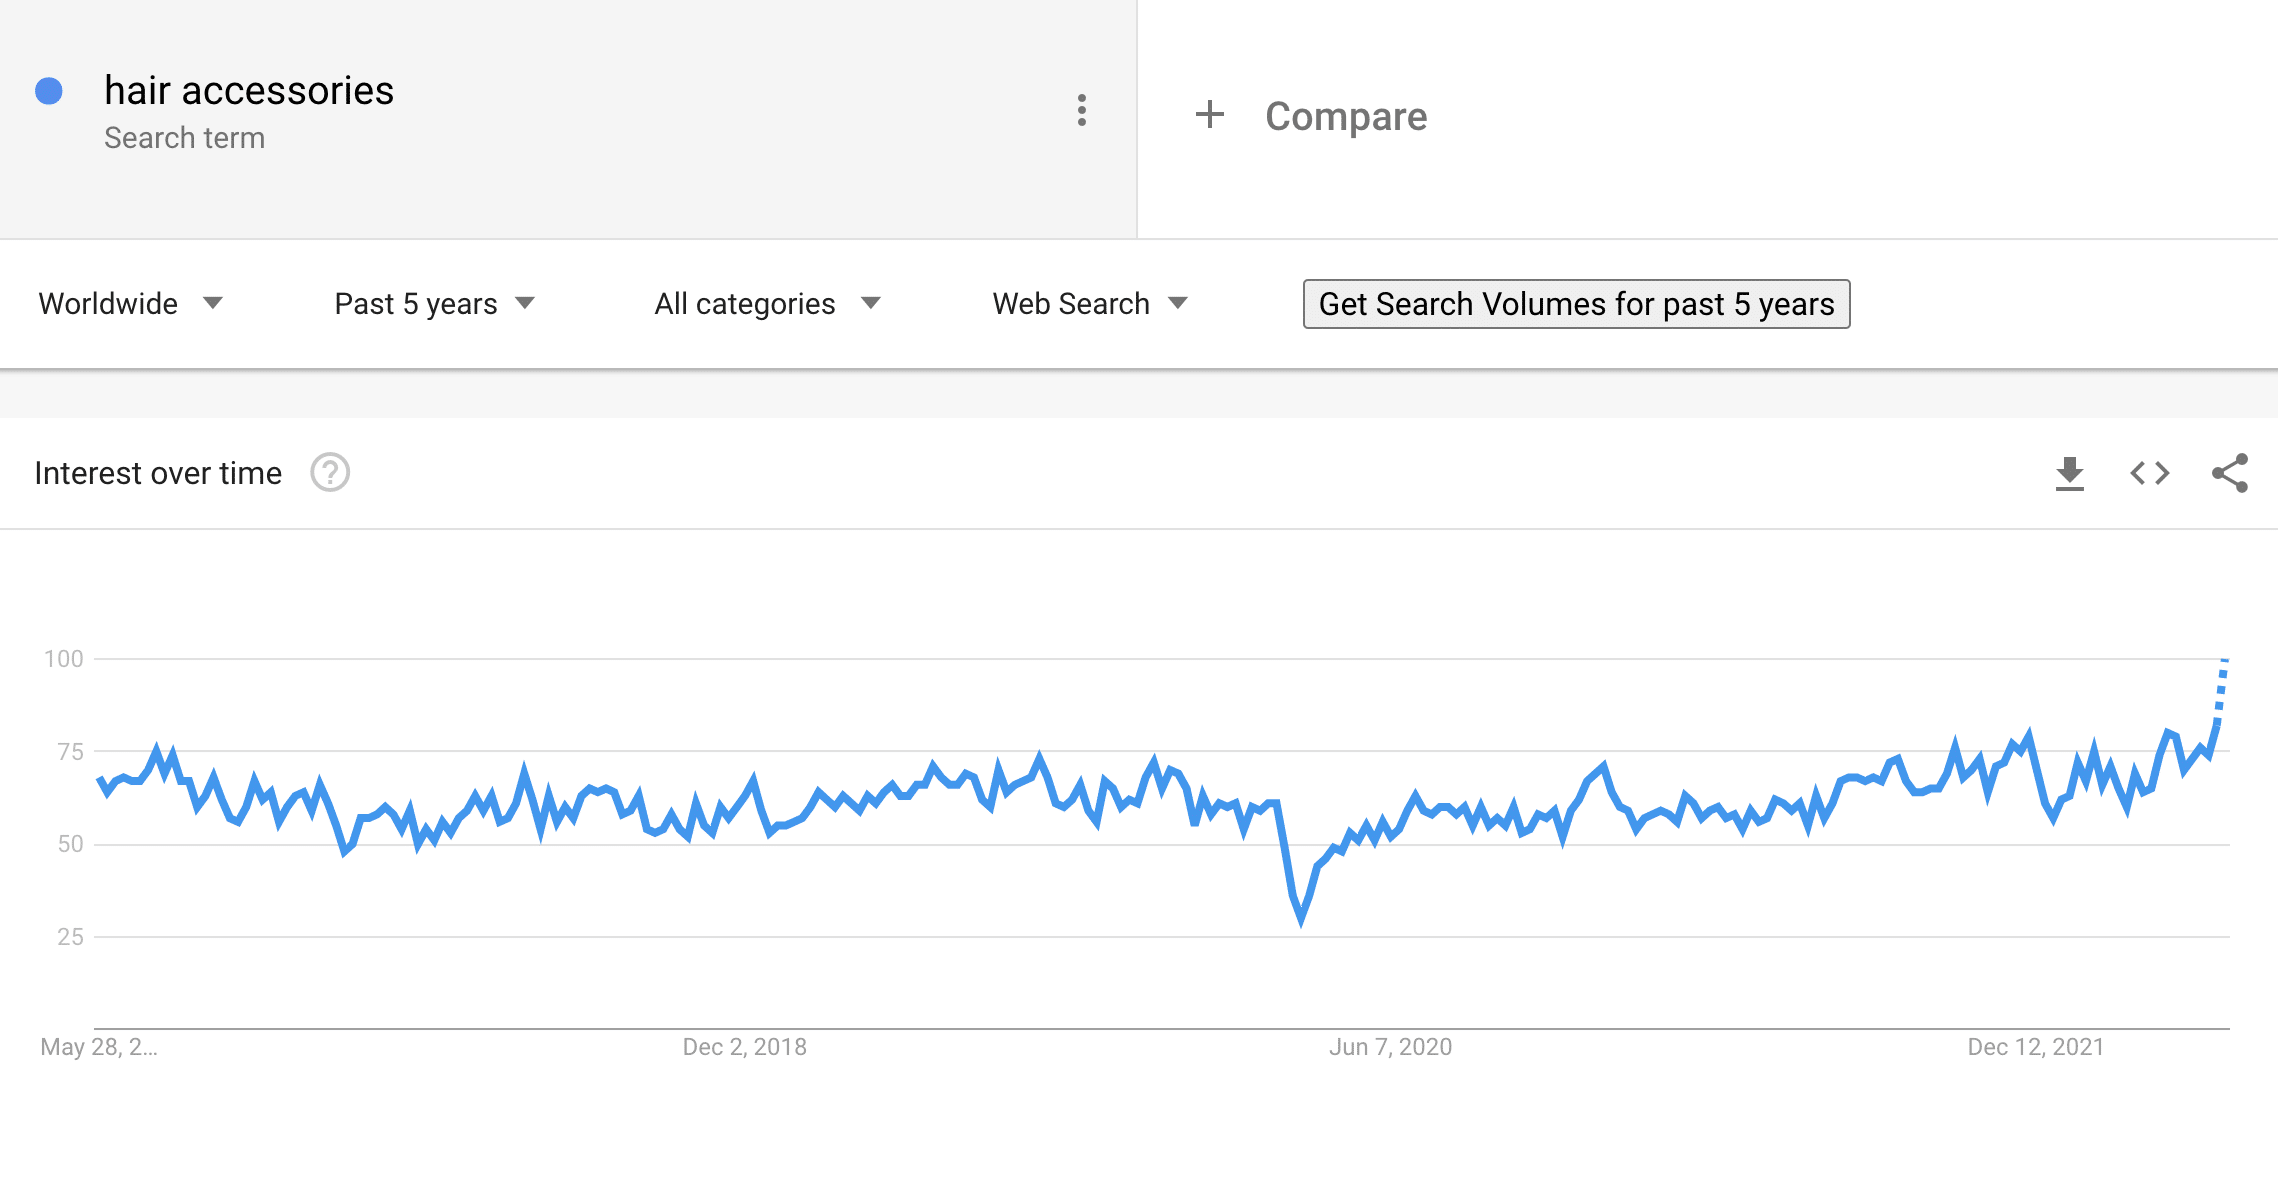 Hair accessories on Google Trends